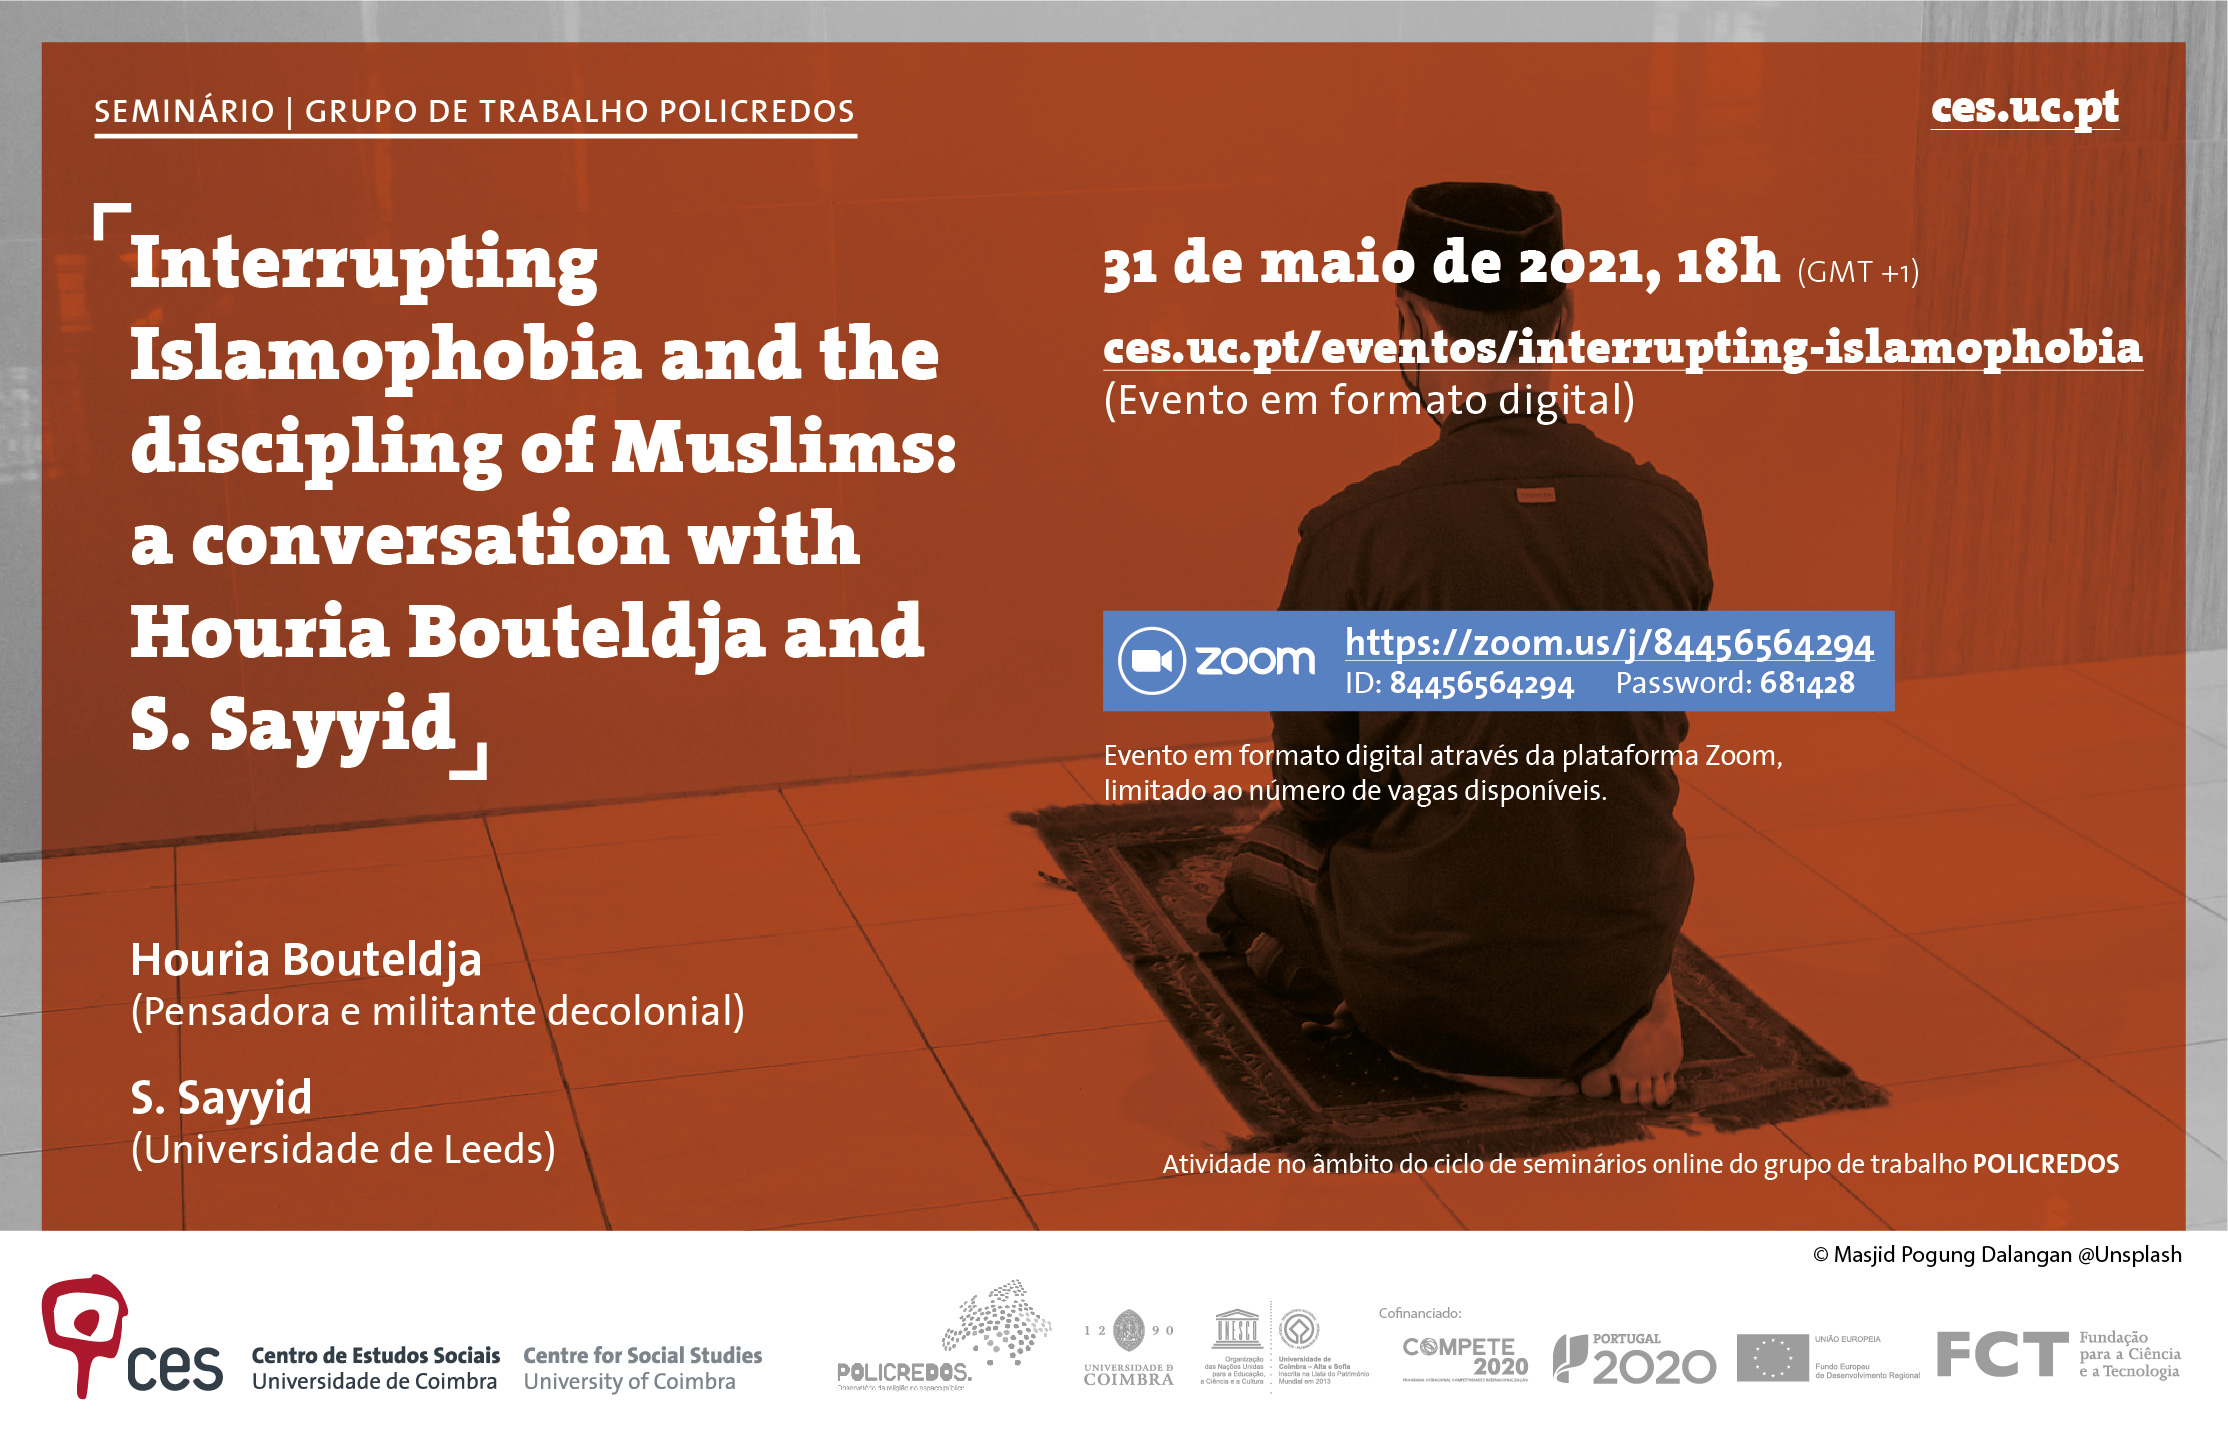 Interrupting Islamophobia and the discipling of Muslims: a conversation with Houria Bouteldja and S. Sayyid<span id="edit_33730"><script>$(function() { $('#edit_33730').load( "/myces/user/editobj.php?tipo=evento&id=33730" ); });</script></span>